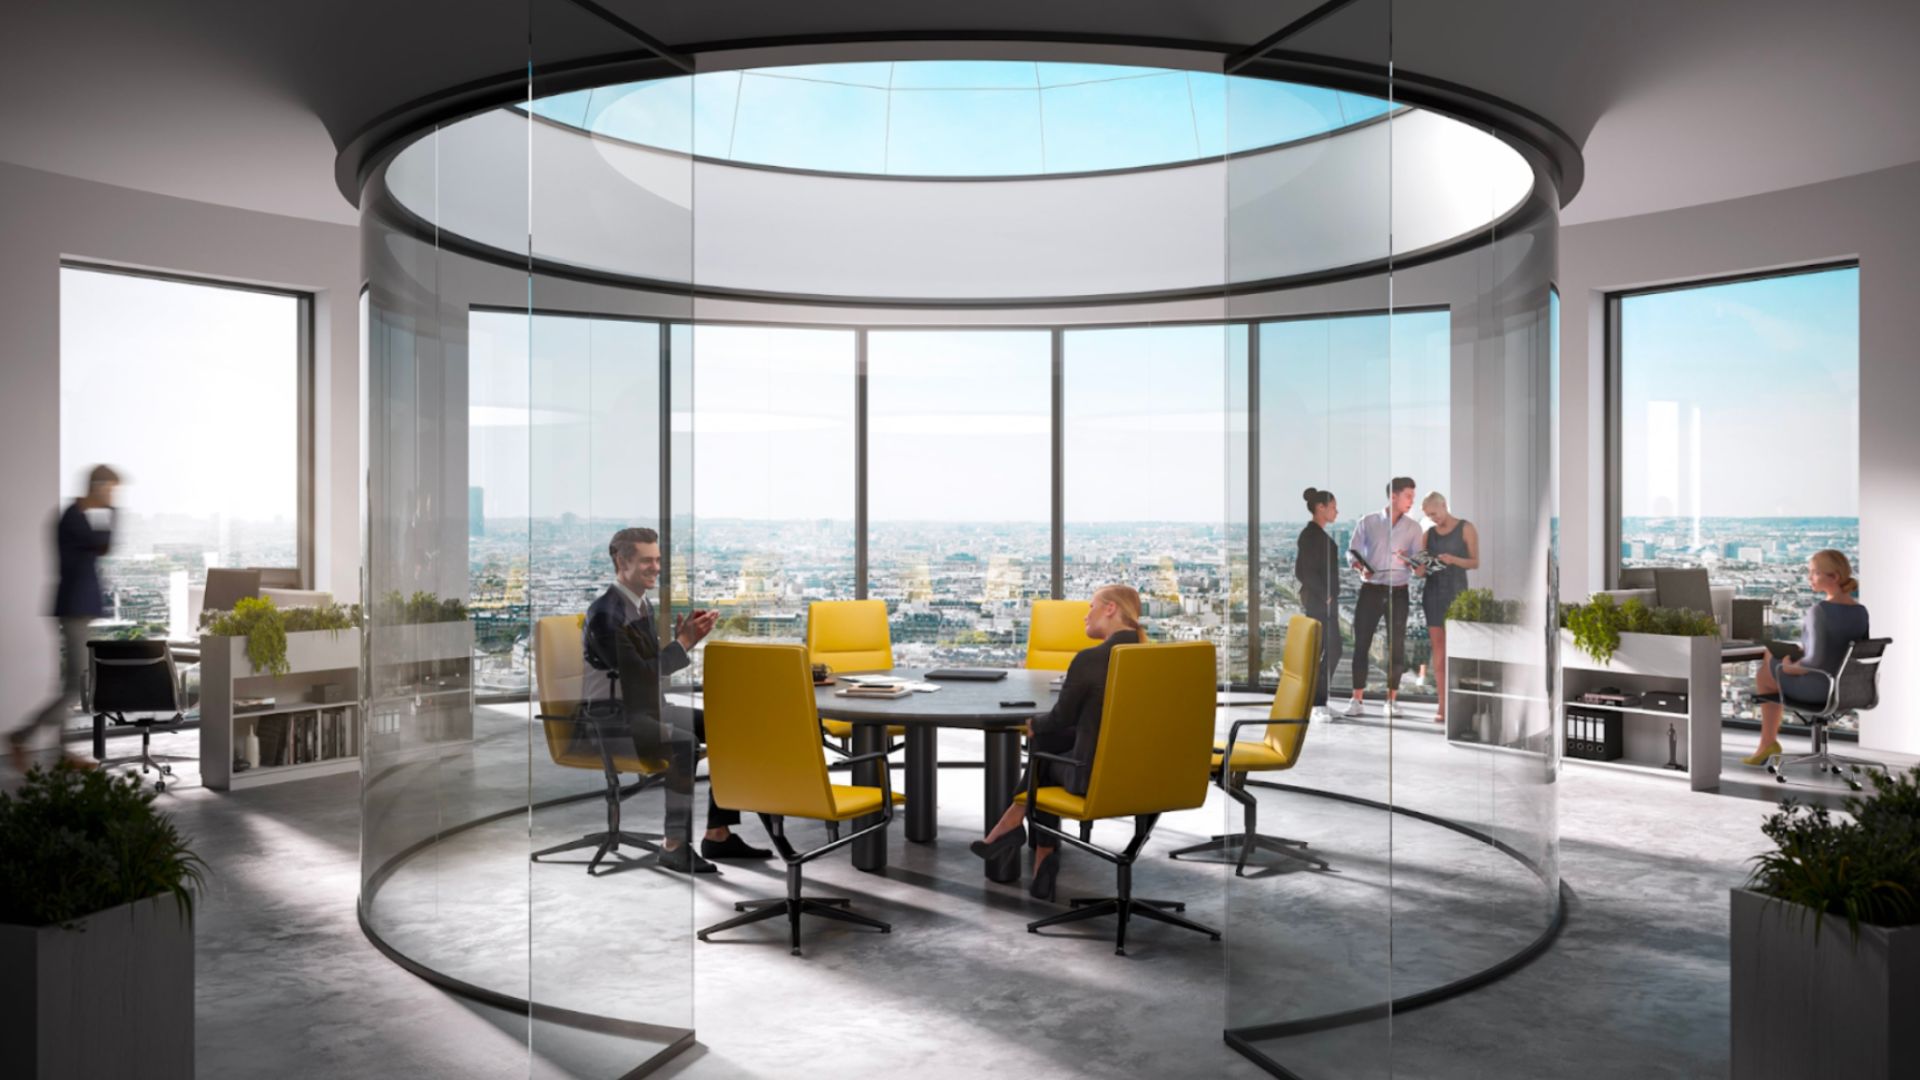 Professionals convene around a sleek, modern table in a high-rise office, with yellow chairs adding a pop of color, illustrating the success of a product in a corporate environment.